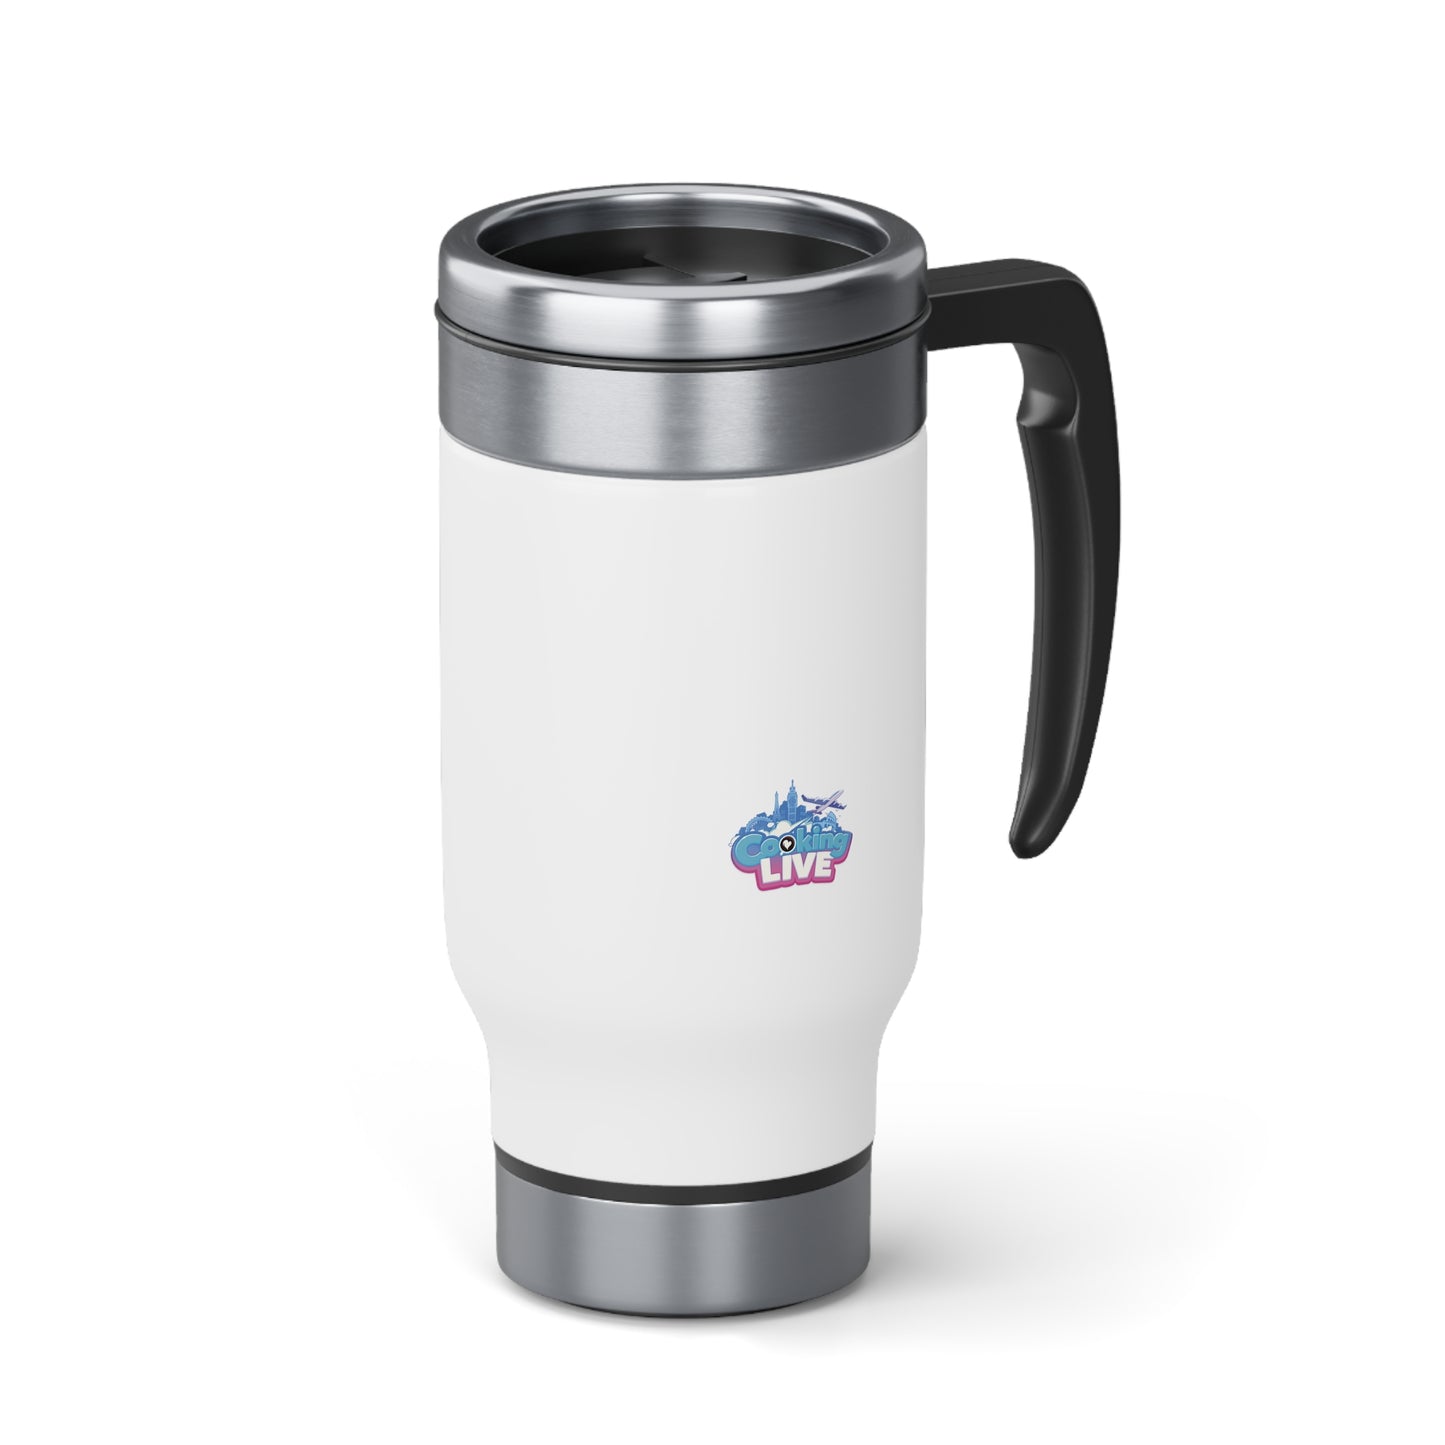 Cooking Live Stainless Steel Travel Mug with Handle, 14oz